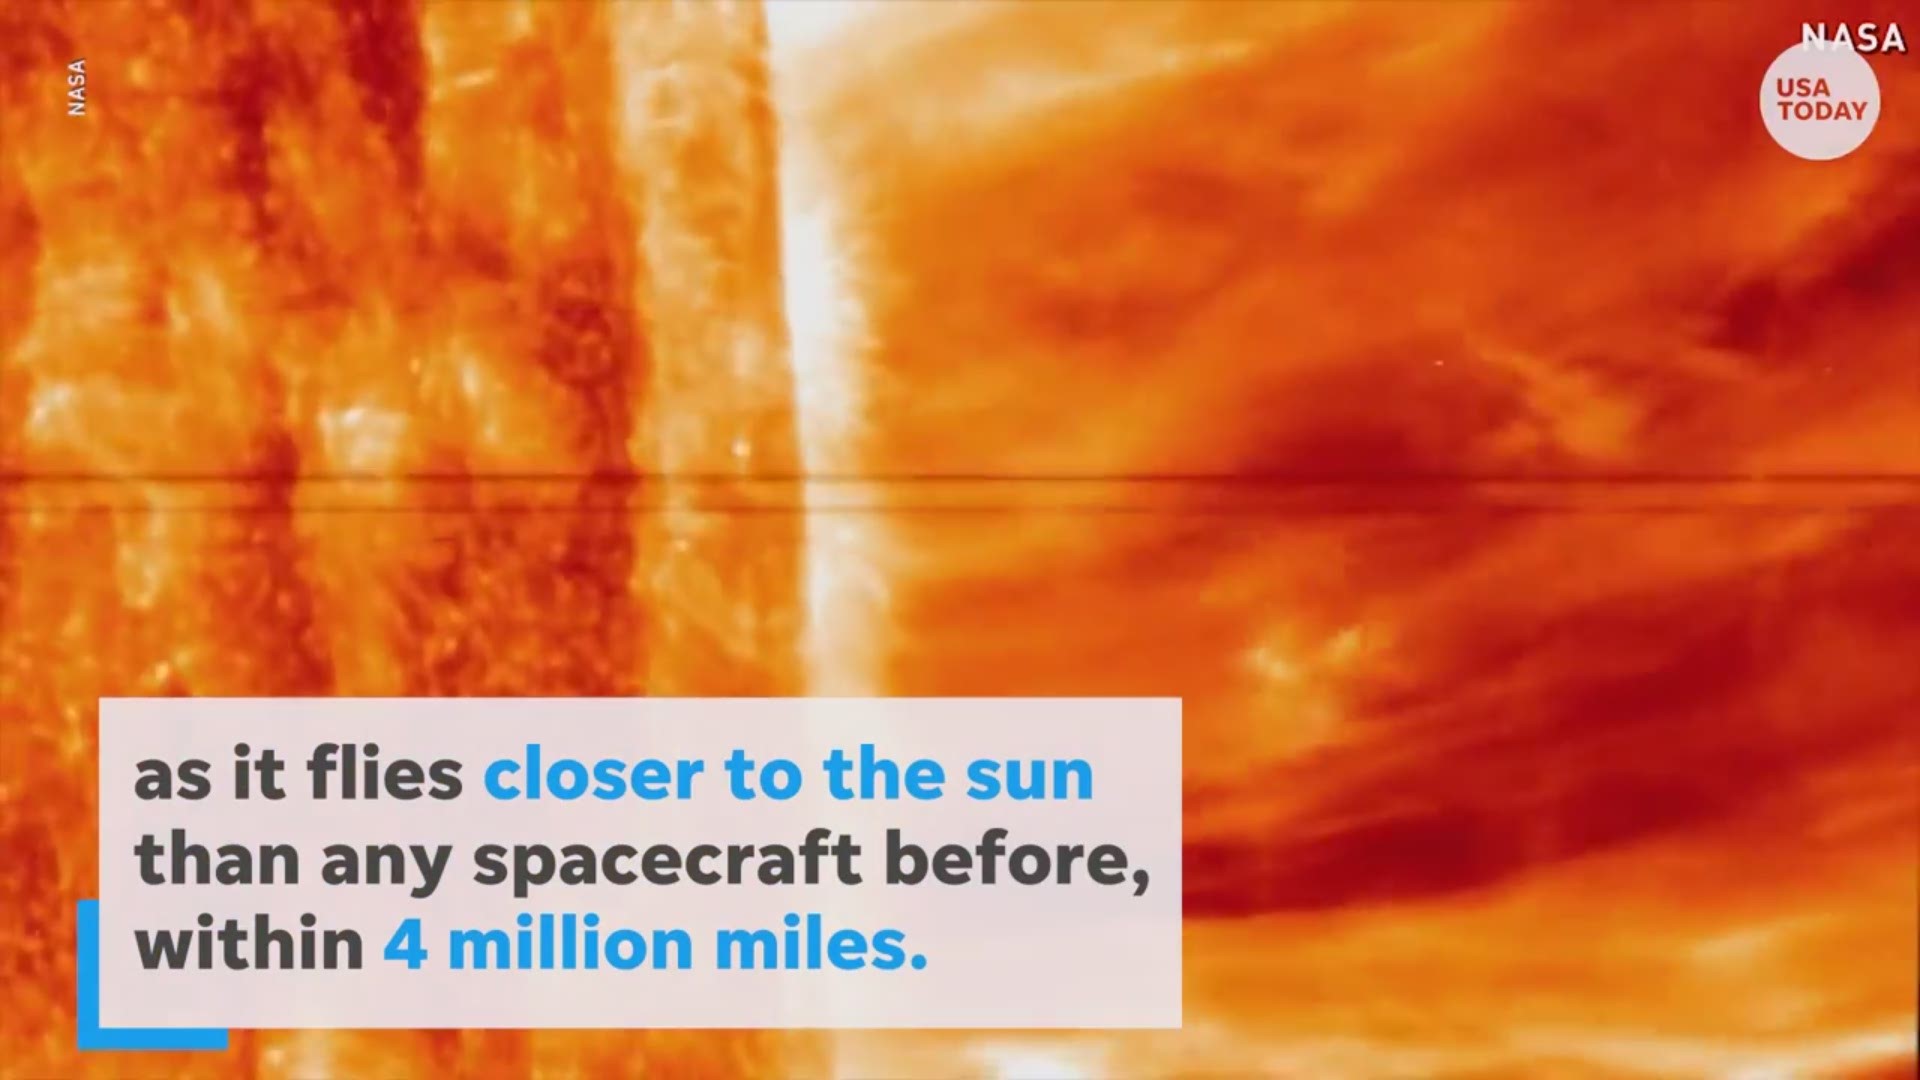 NASA's Parker Solar Probe will explore the sun's outer atmosphere to shed light on how stars work.